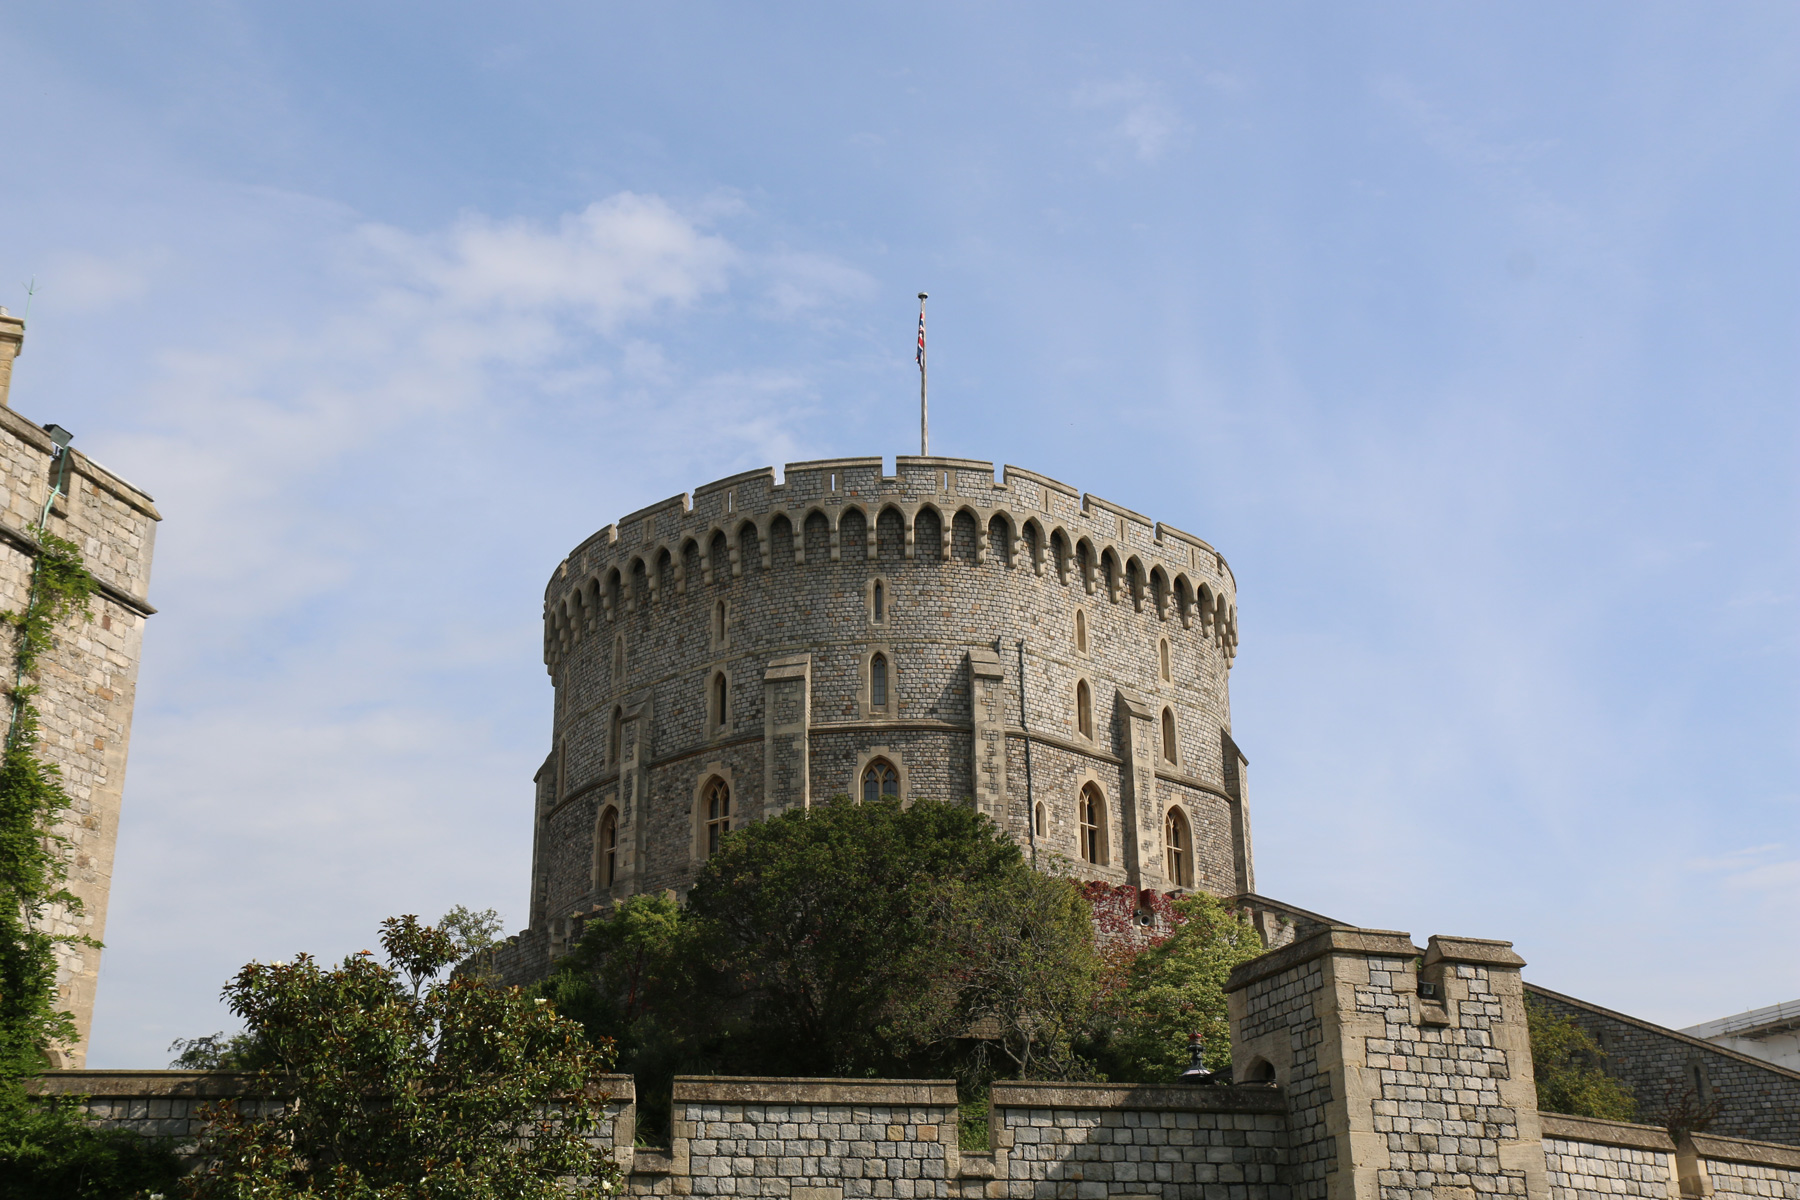 Climbing to the top of Windsor Castle's Round Tower – IanVisits